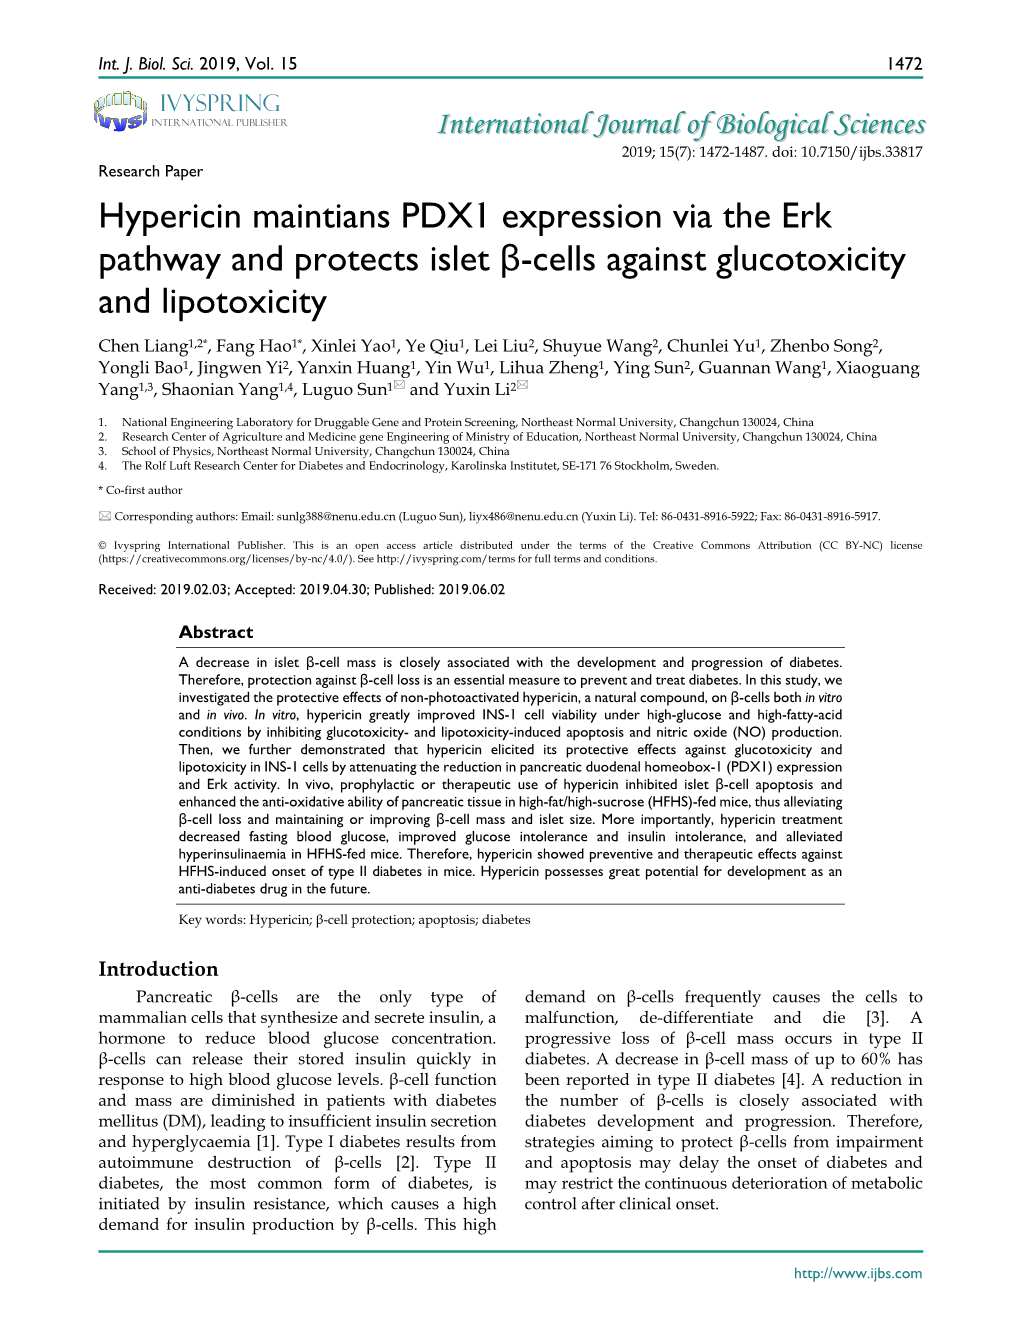 Hypericin Maintians PDX1 Expression Via the Erk Pathway and Protects